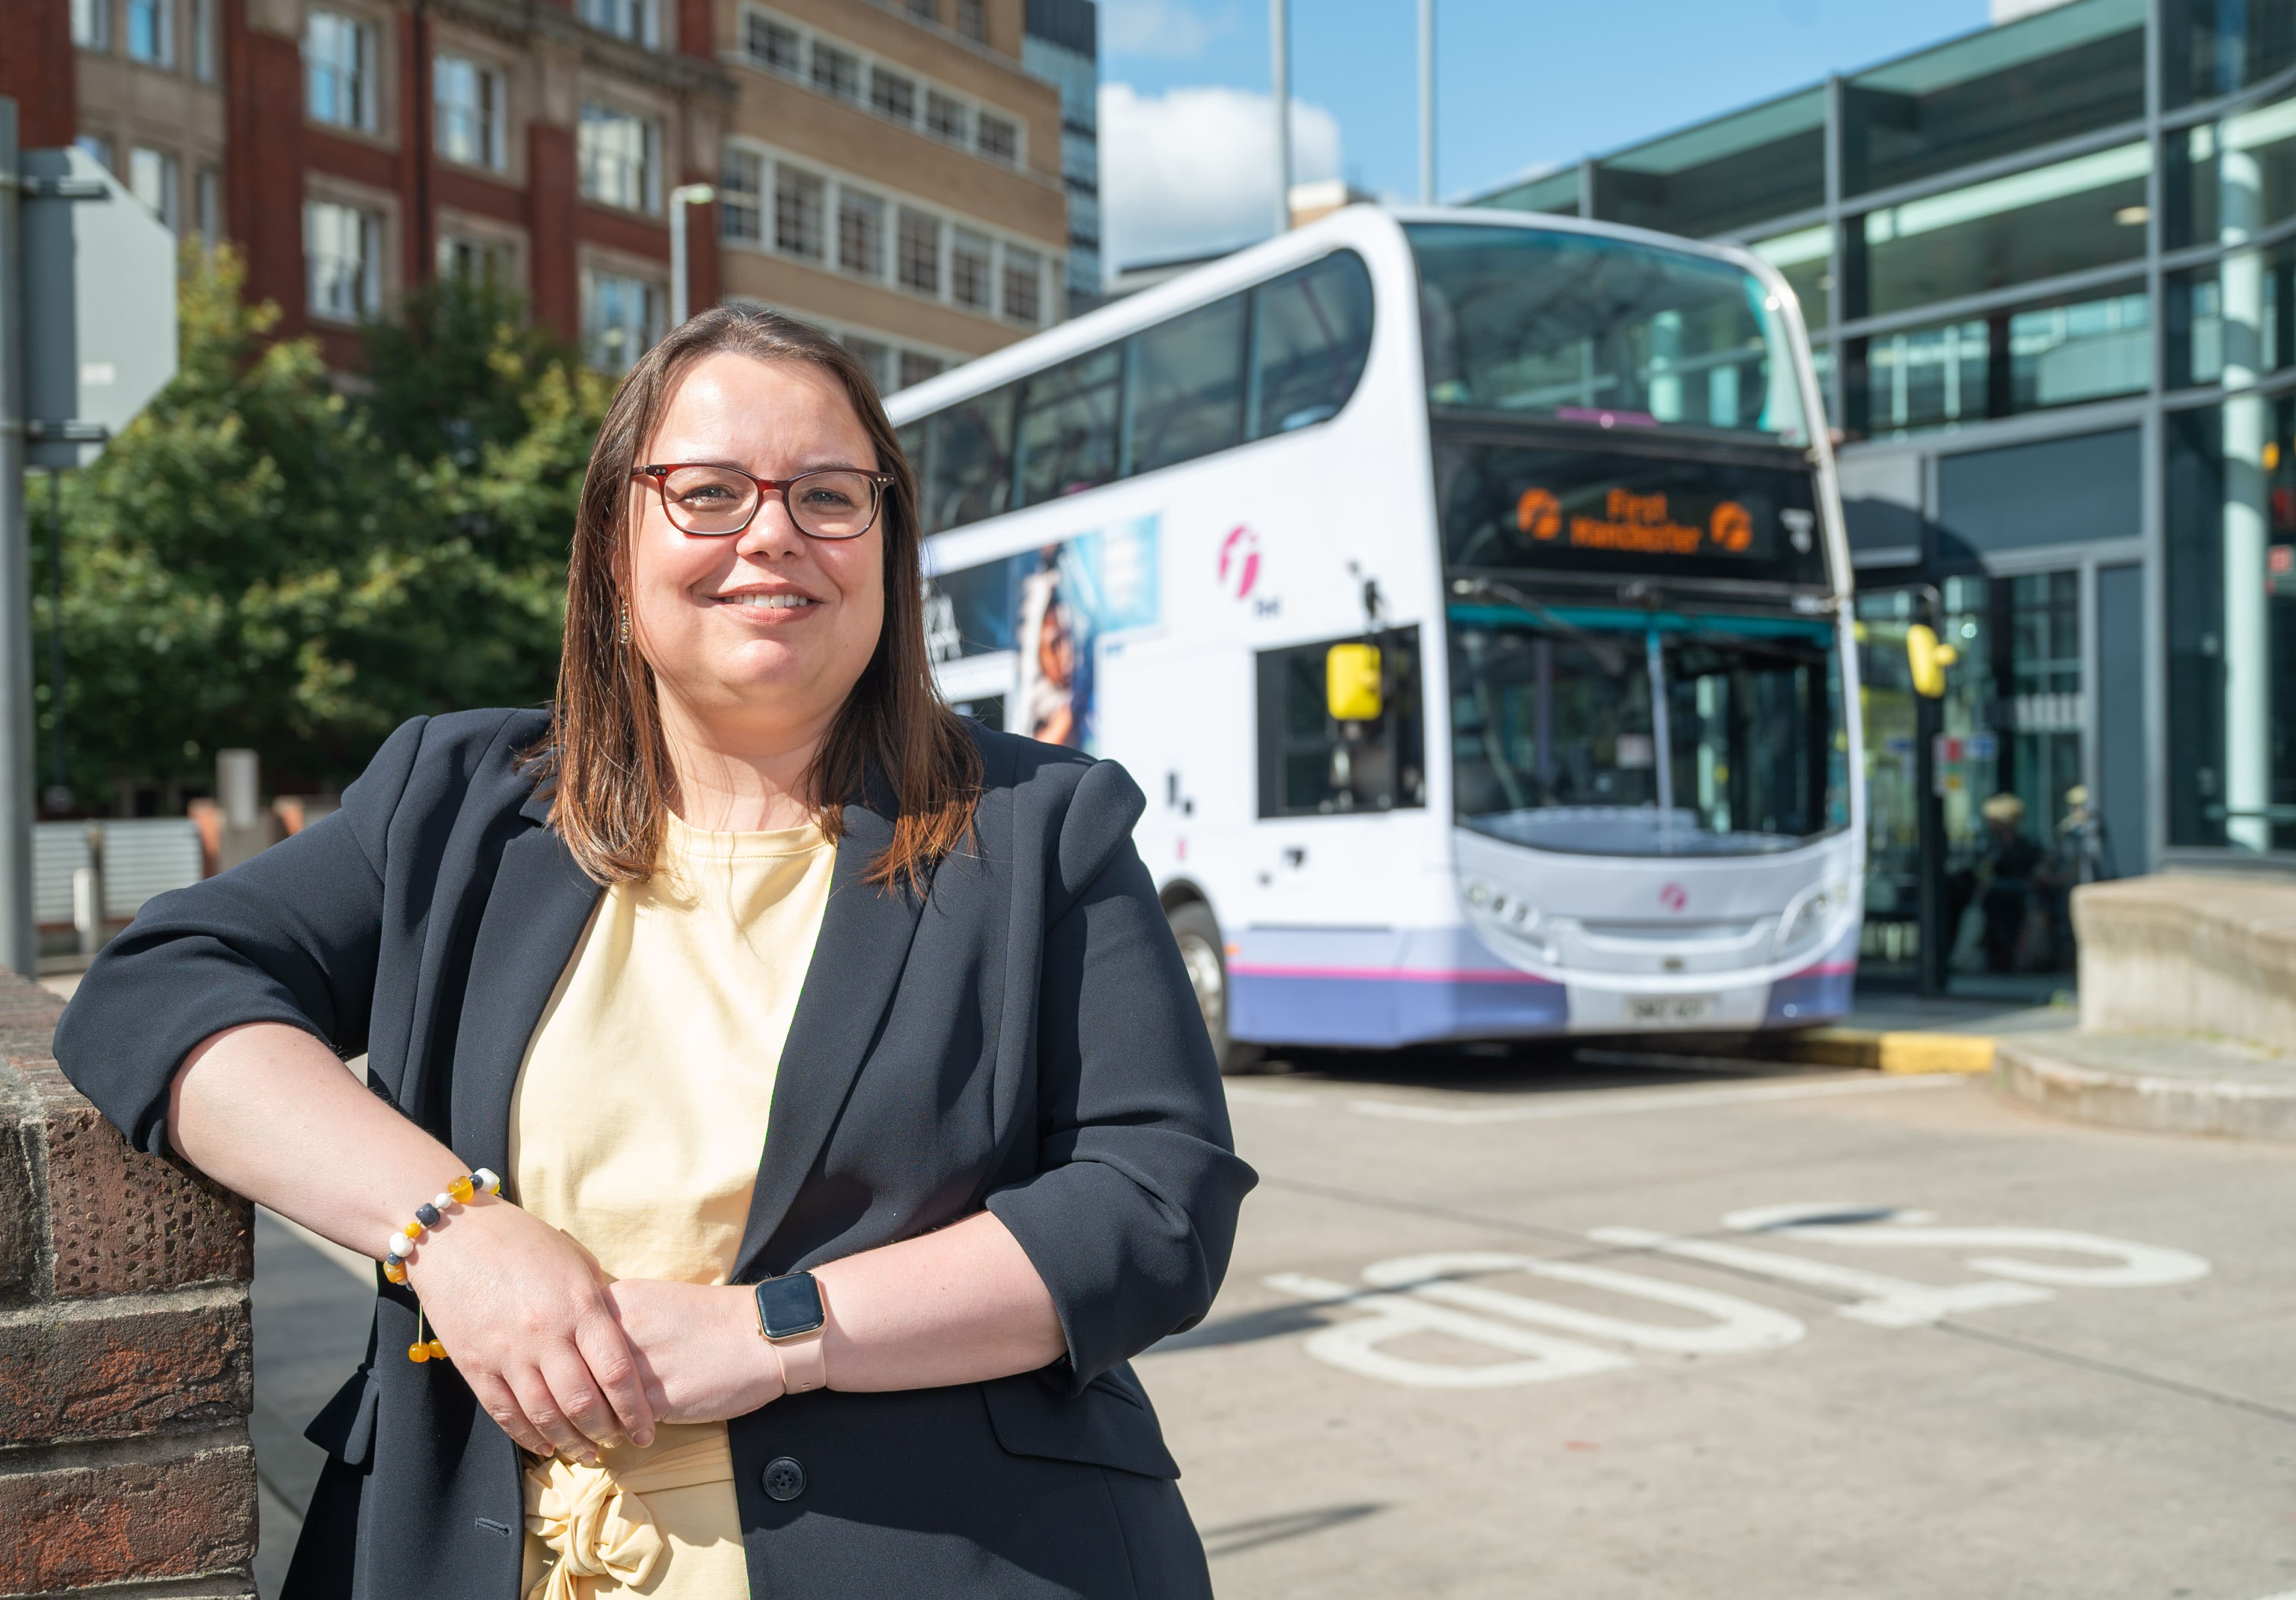 Photo of Zoe Hands in front of a First Bus bus